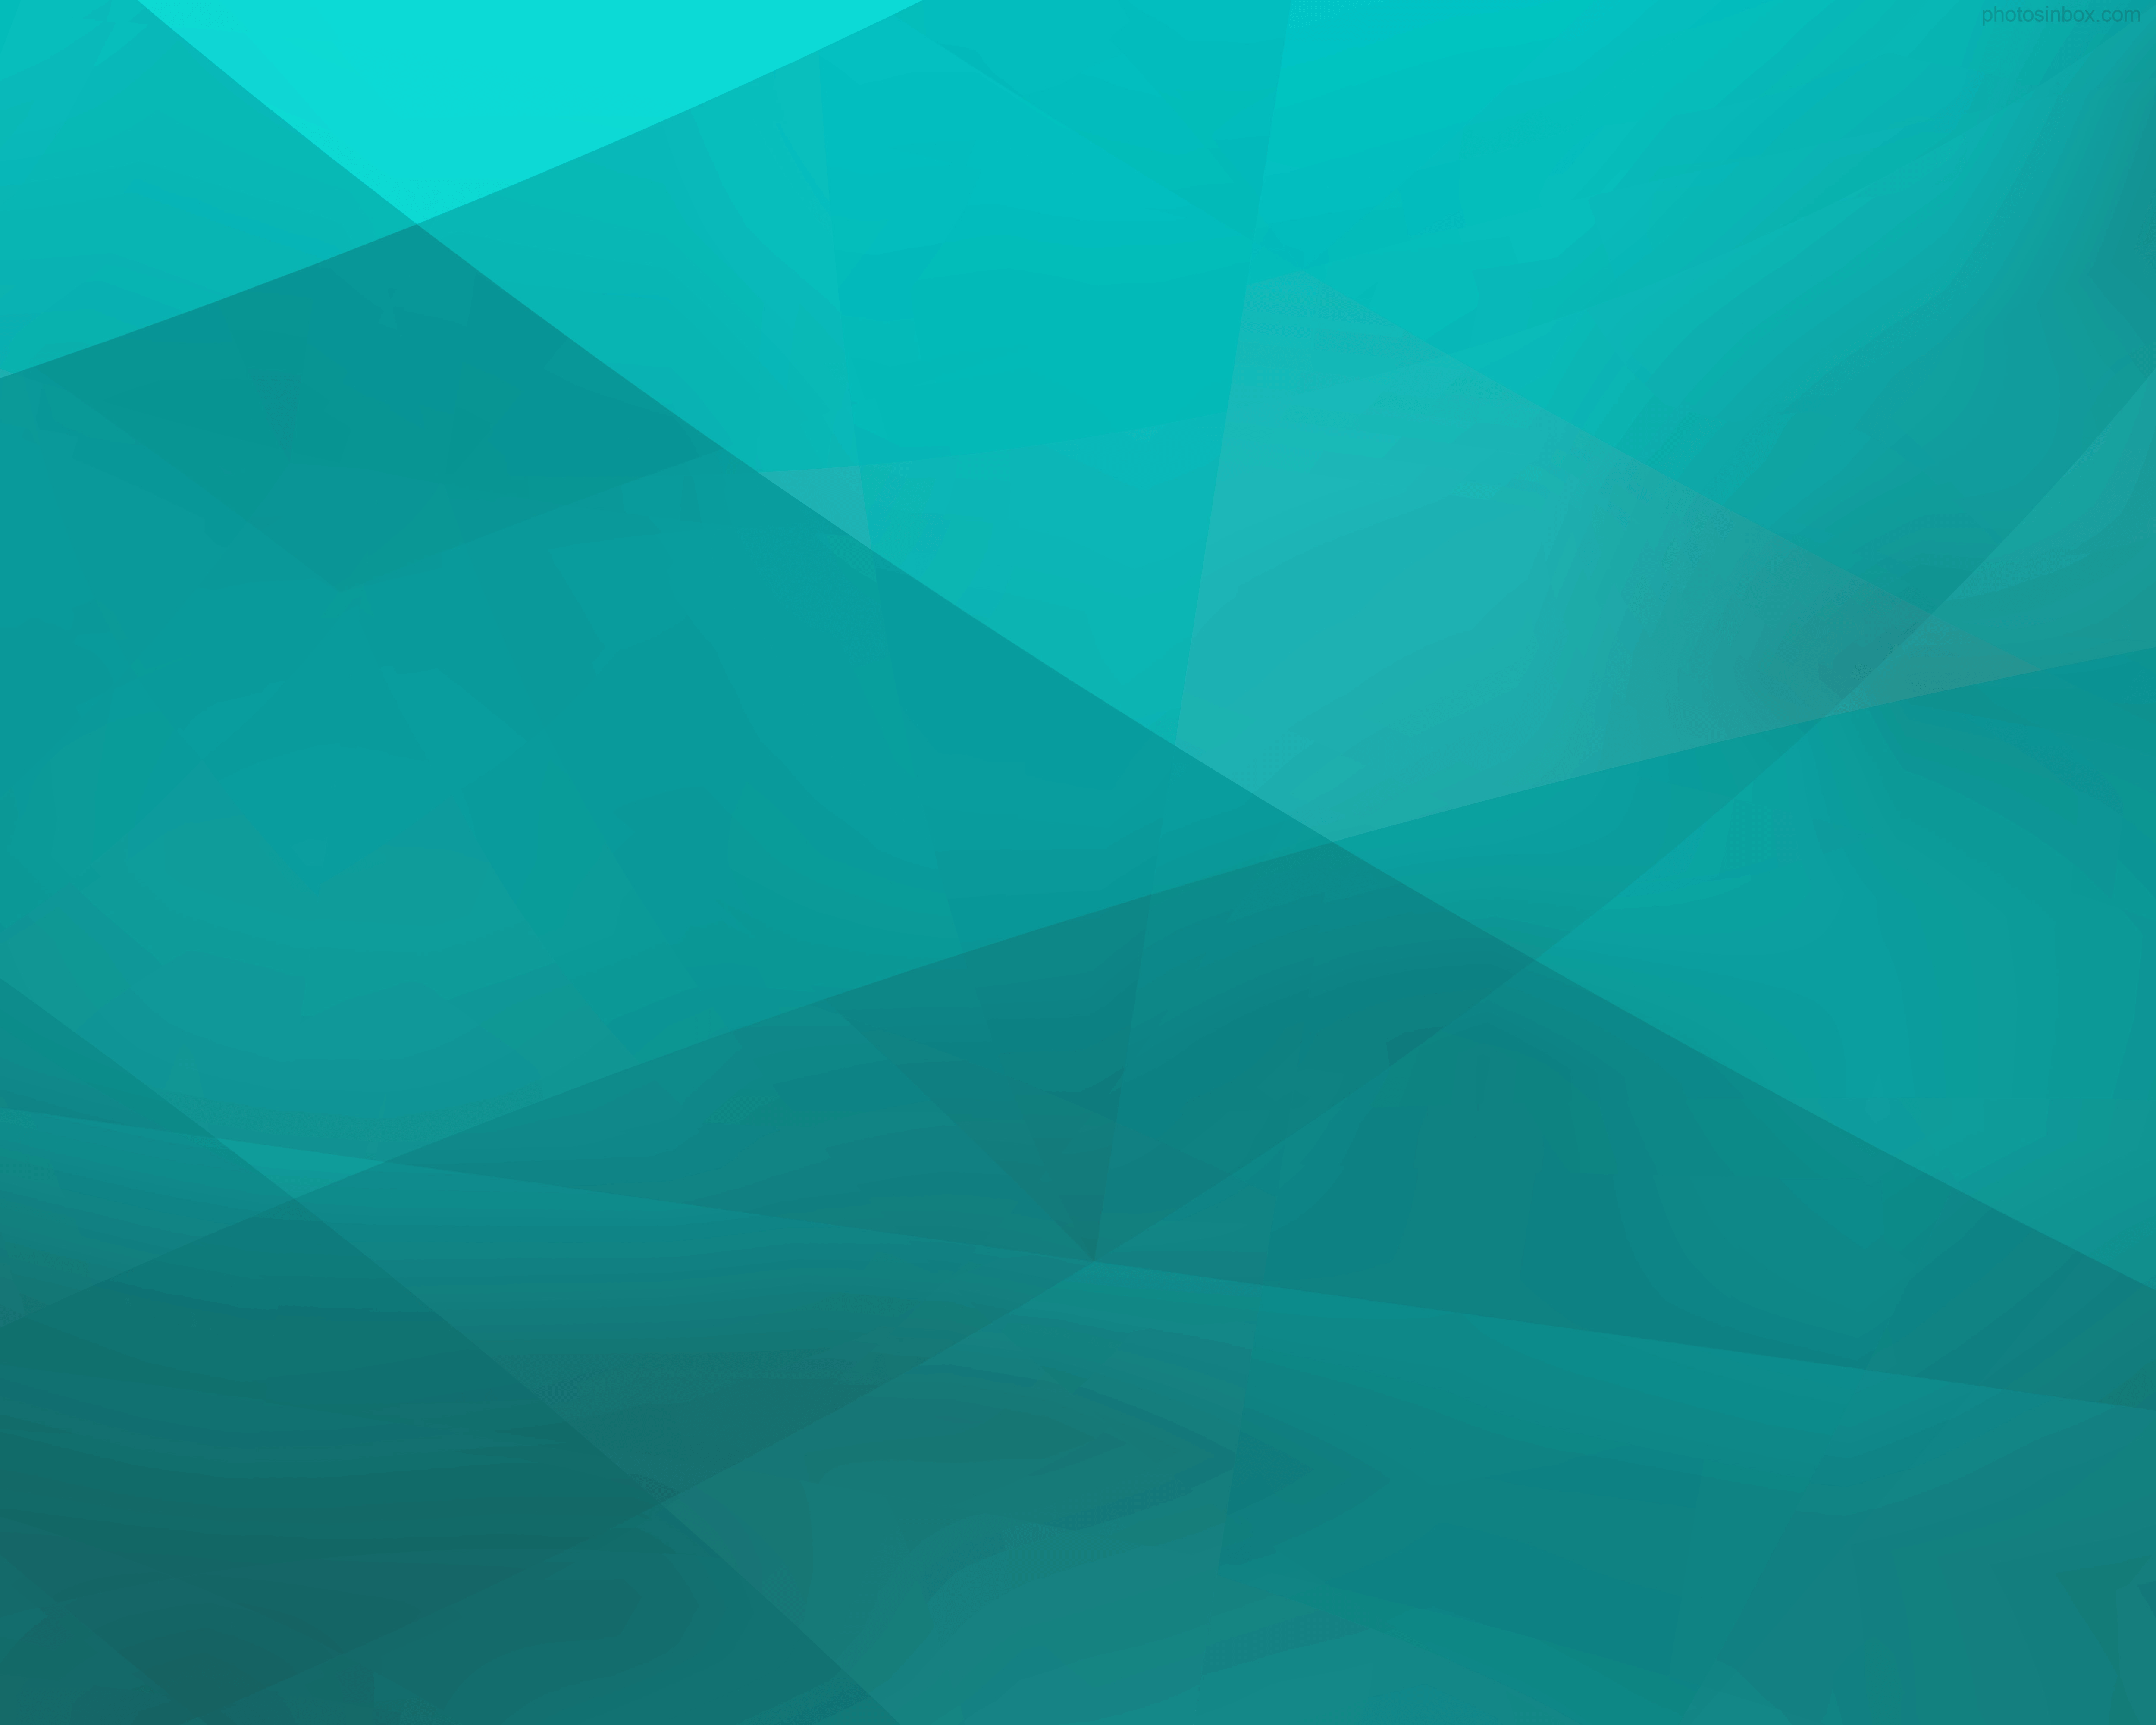 Teal Backgrounds download 5000x4000